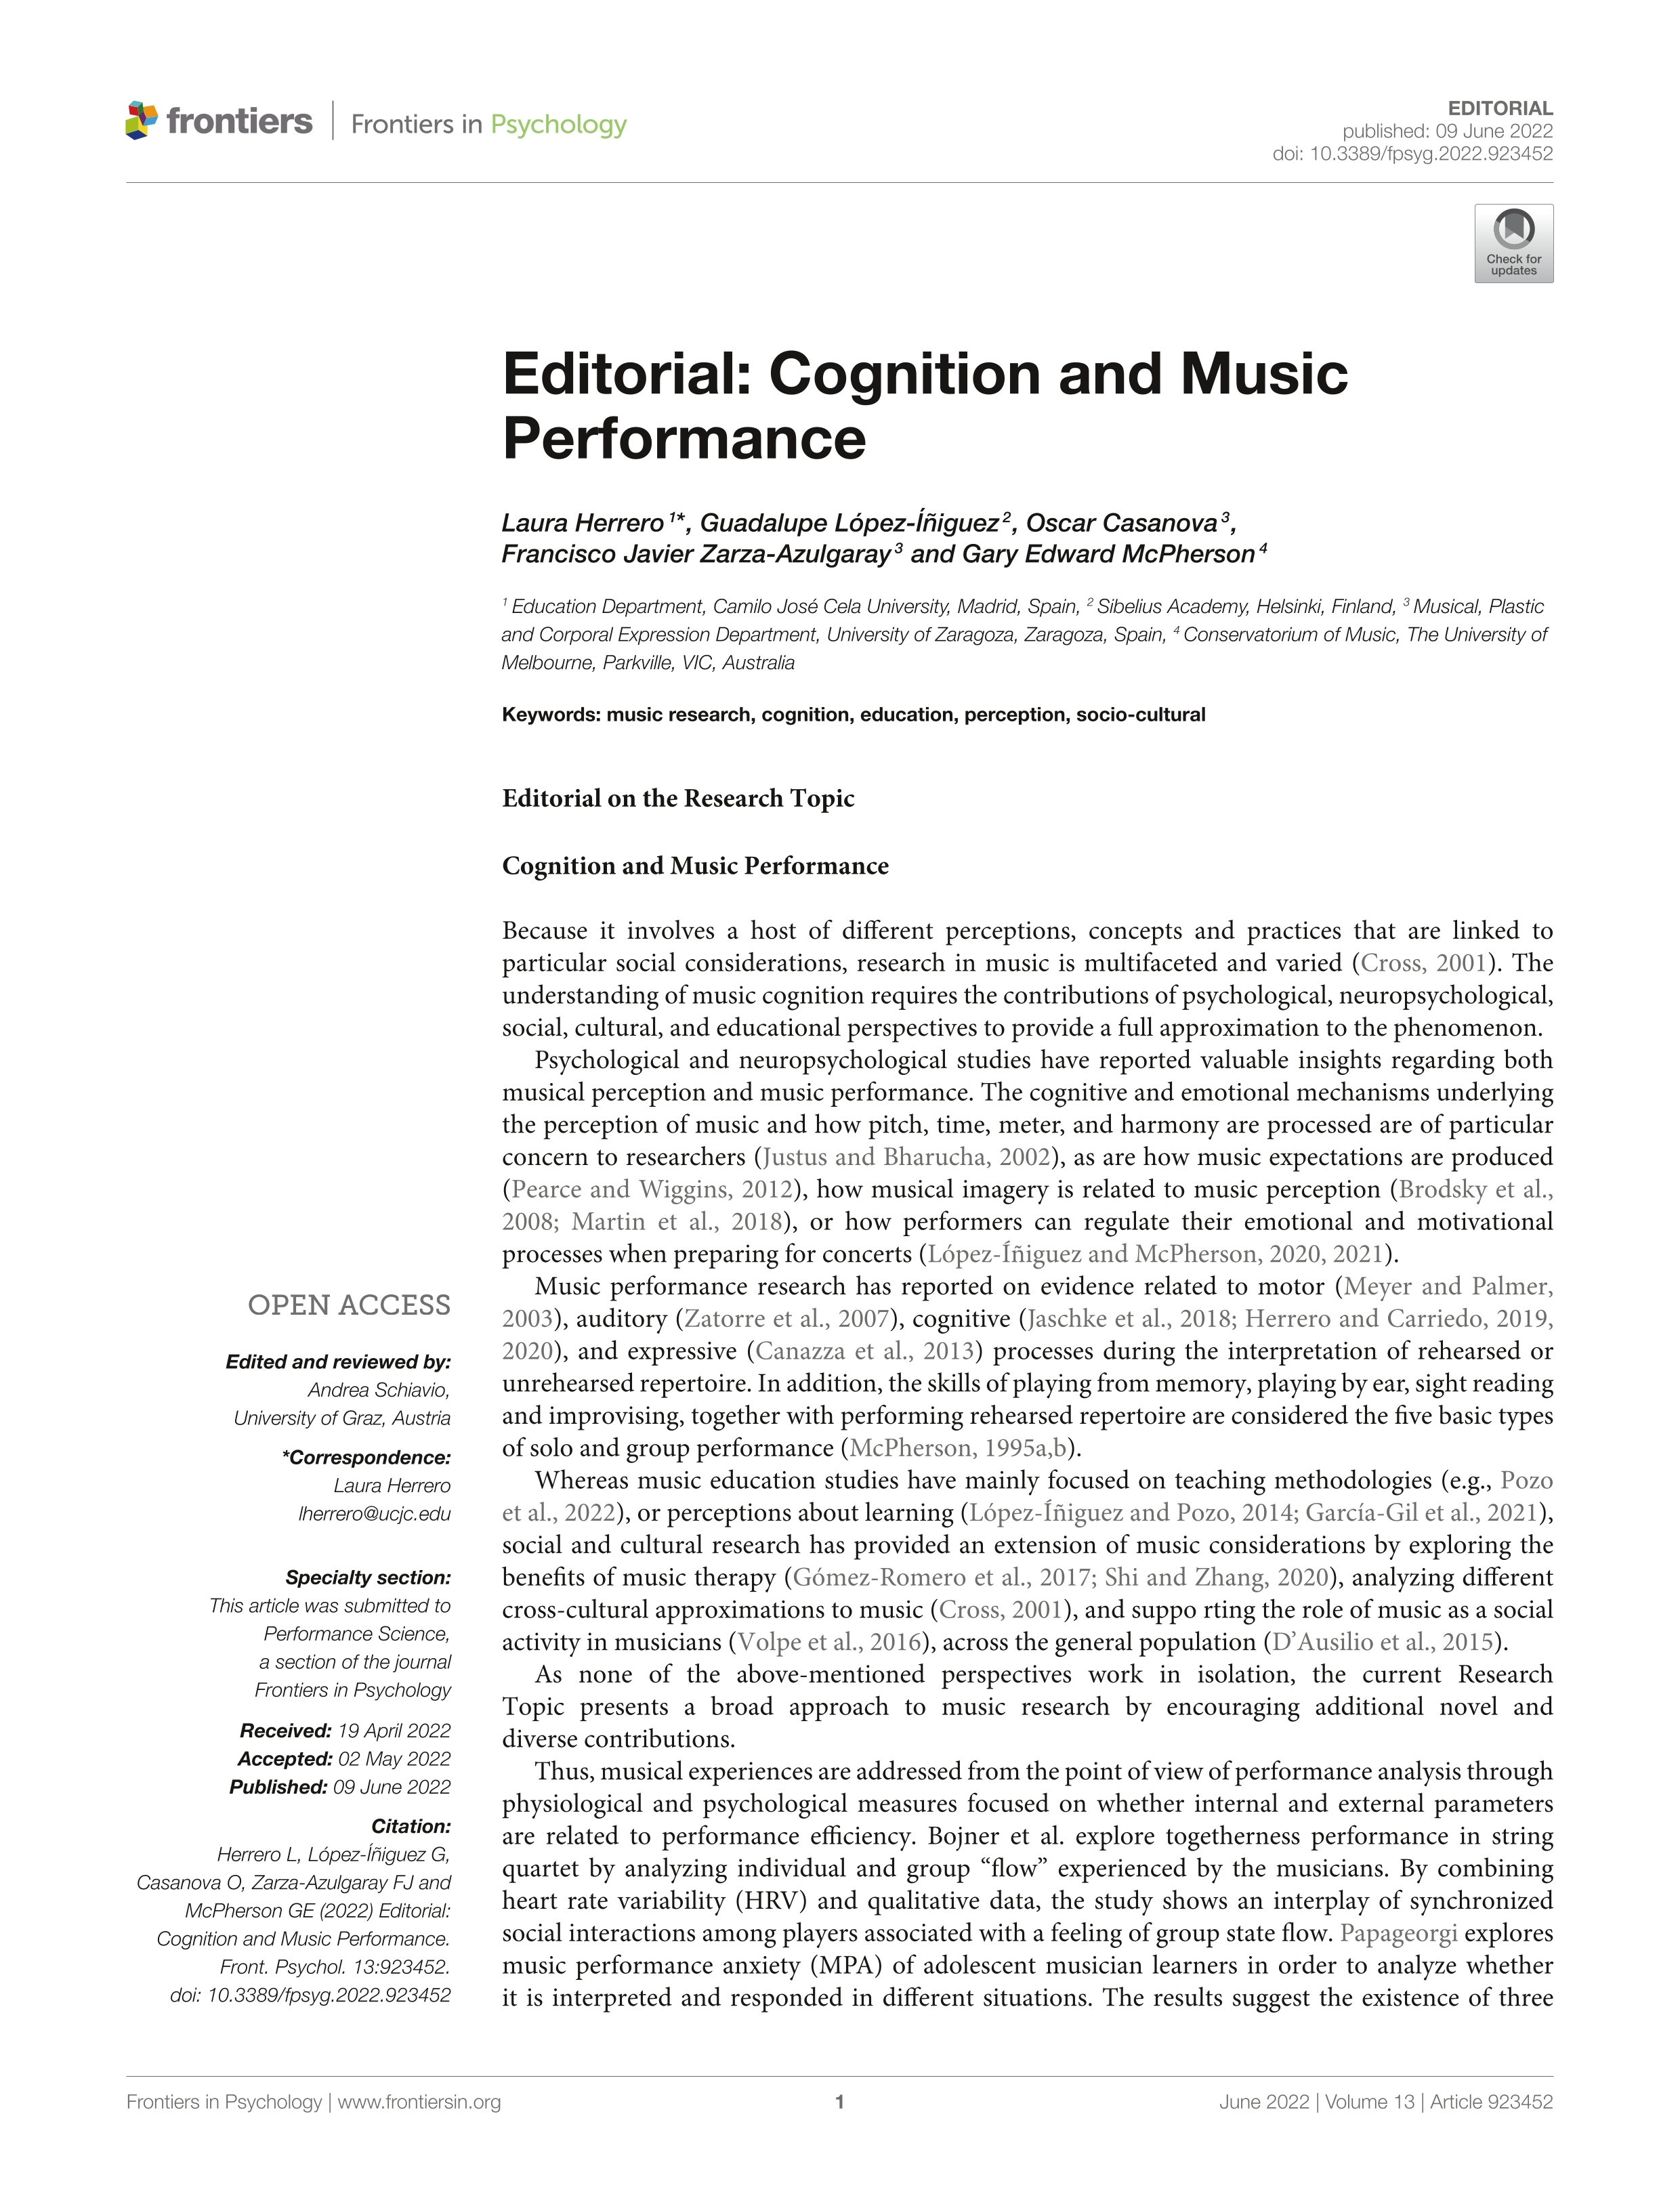 Editorial: Cognition and Music Performance